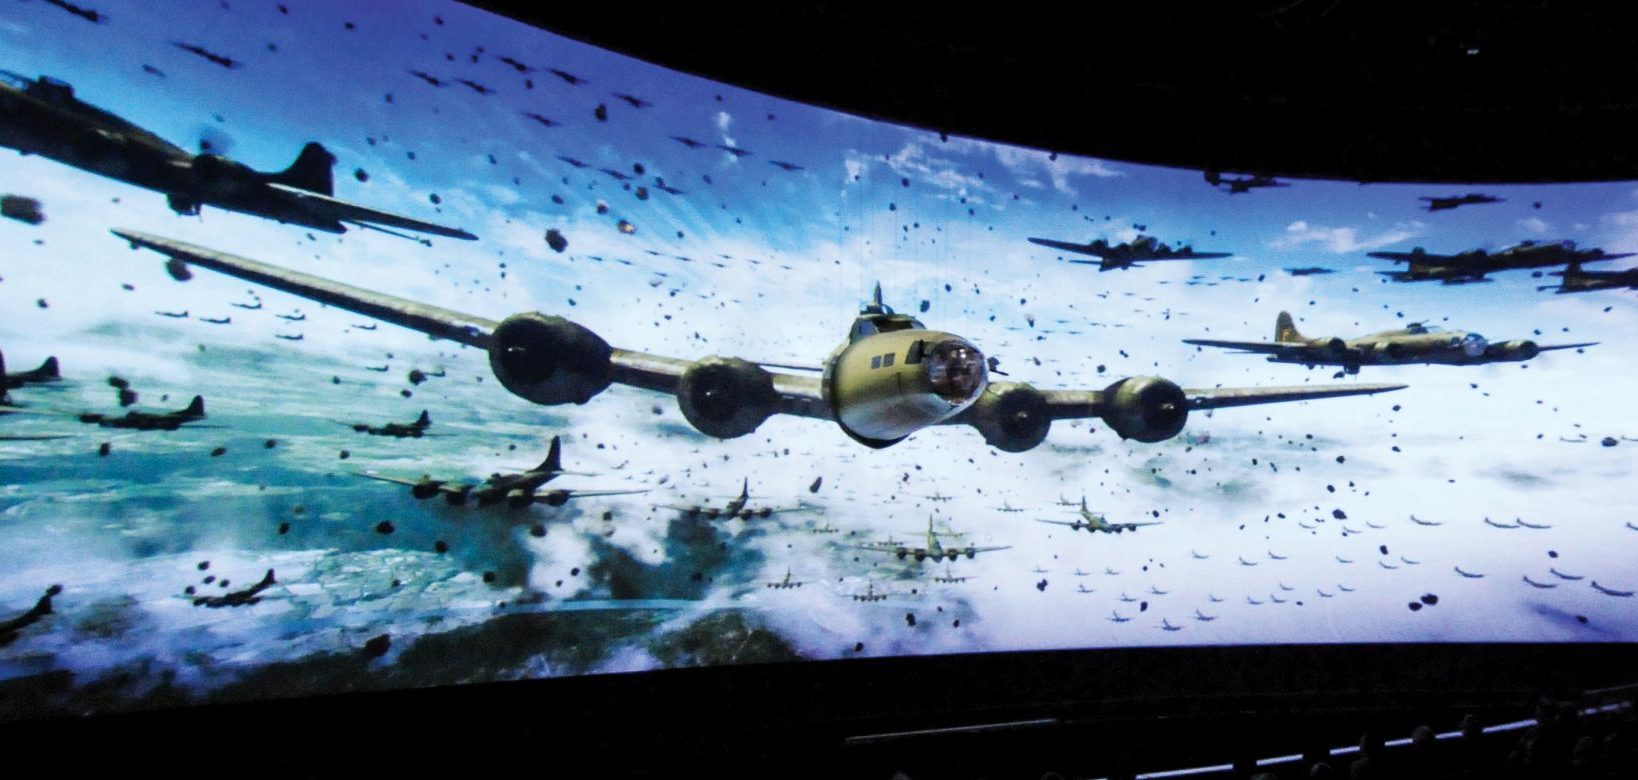 Video screen at WWII museum